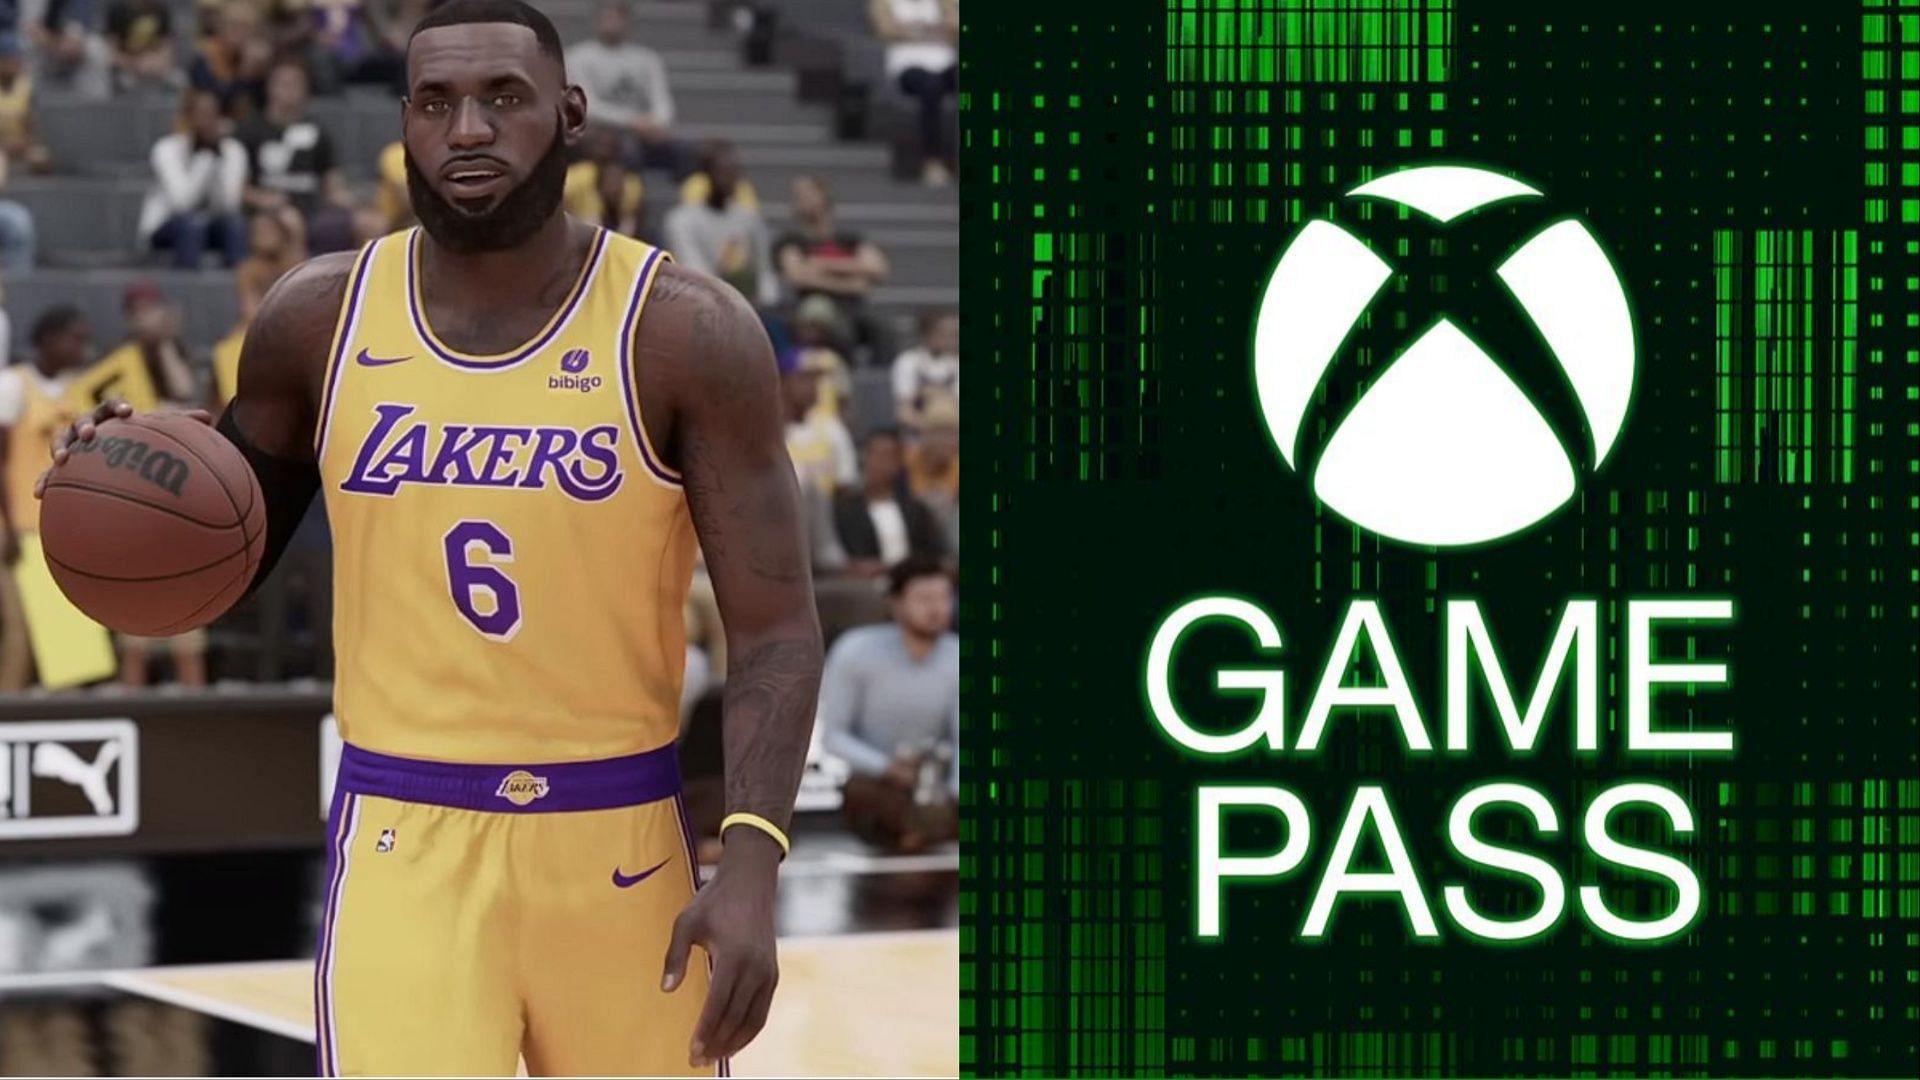 FIFA 23 Xbox Game Pass Trial Dates Revealed